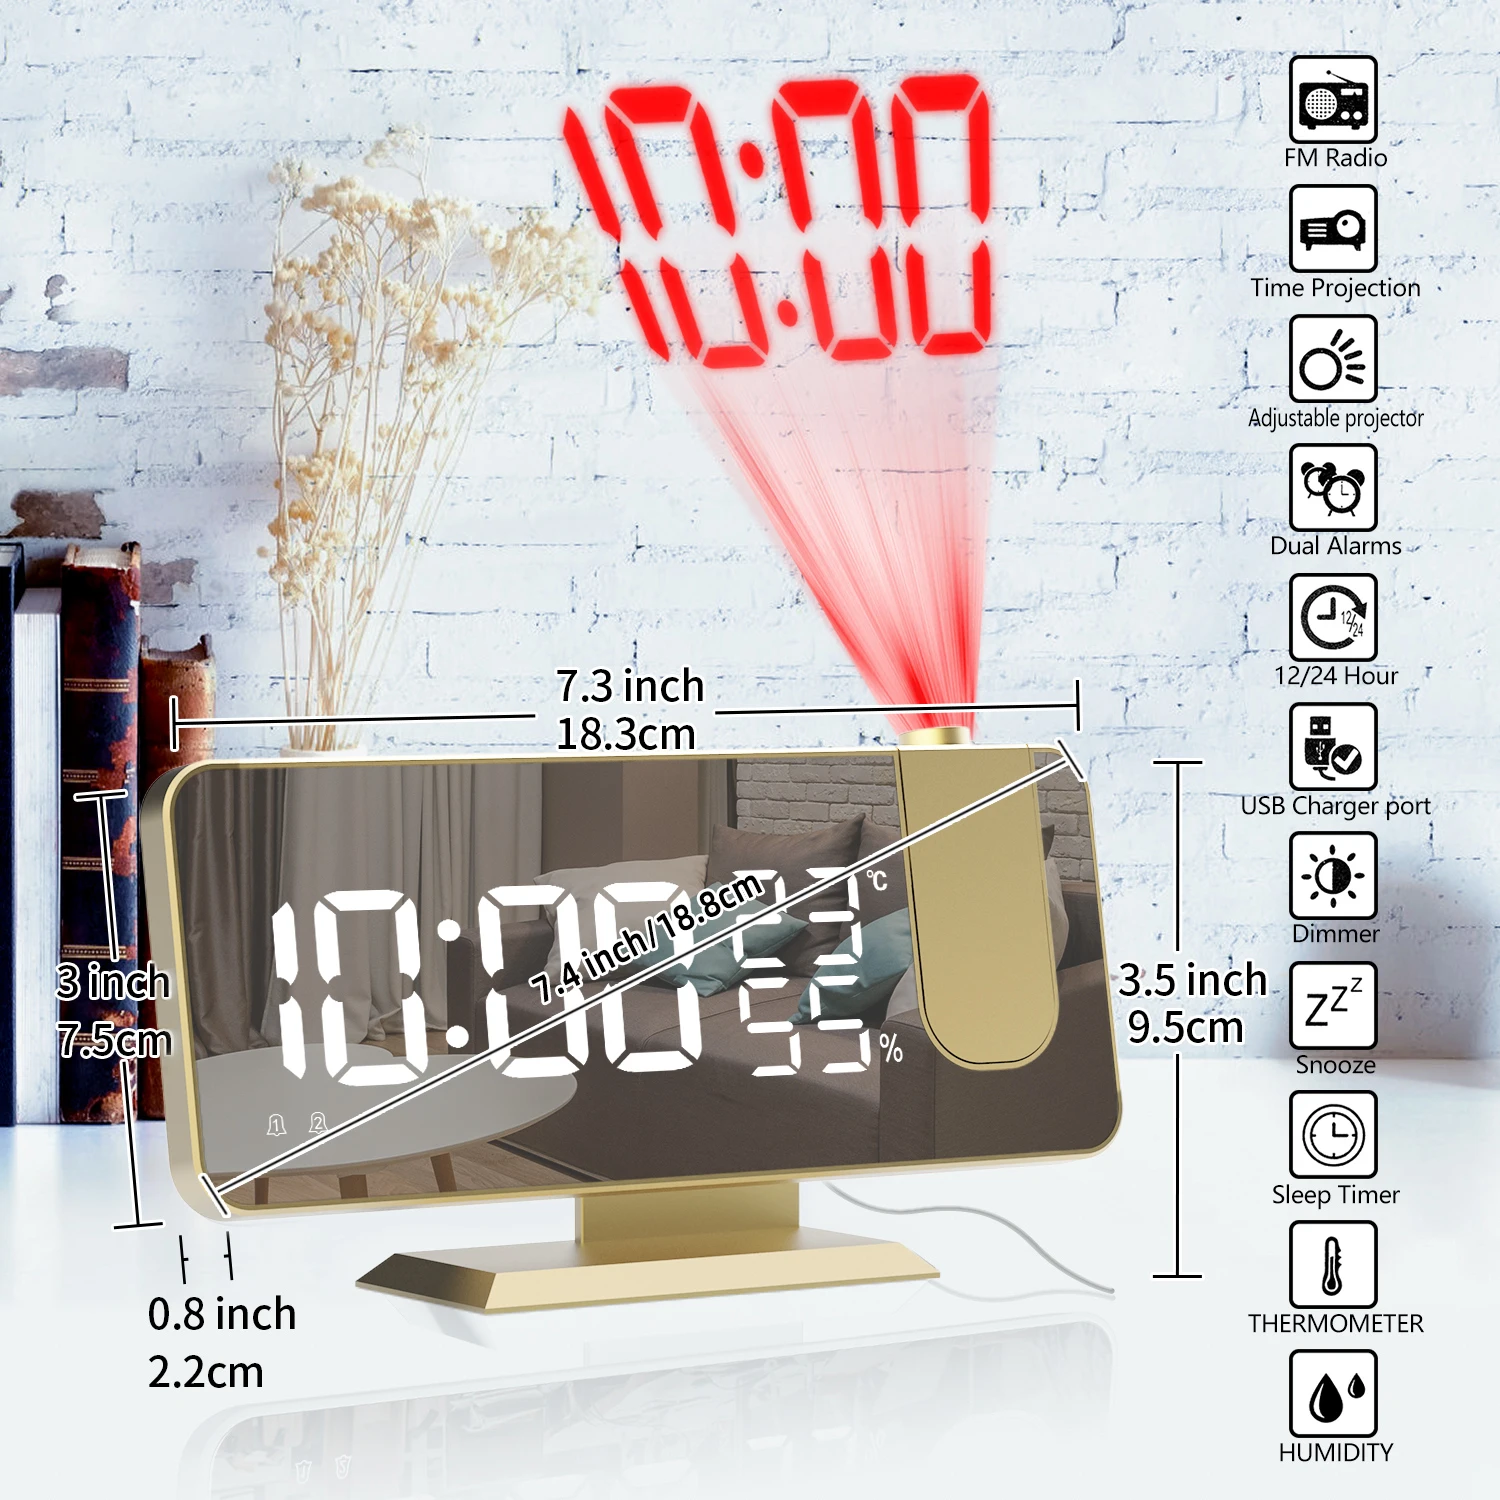 

LED Digital Projection Alarm Clock Watch Table Electronic Desktop Clocks USB Wake Up FM Radio Time Projector Snooze Function